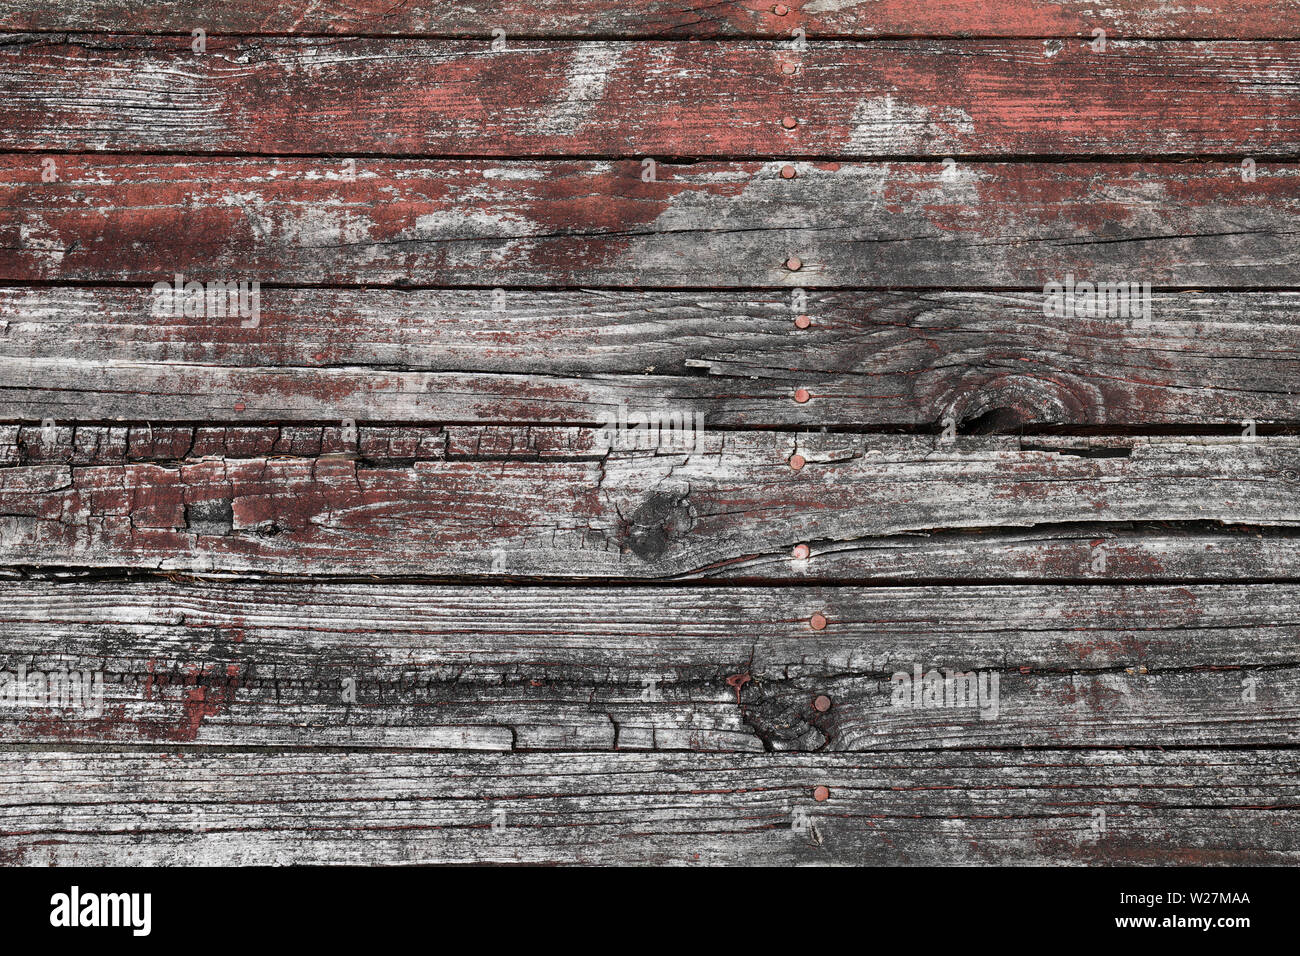 Wood texture background. Old, weathered deck with nails I Stock Photo